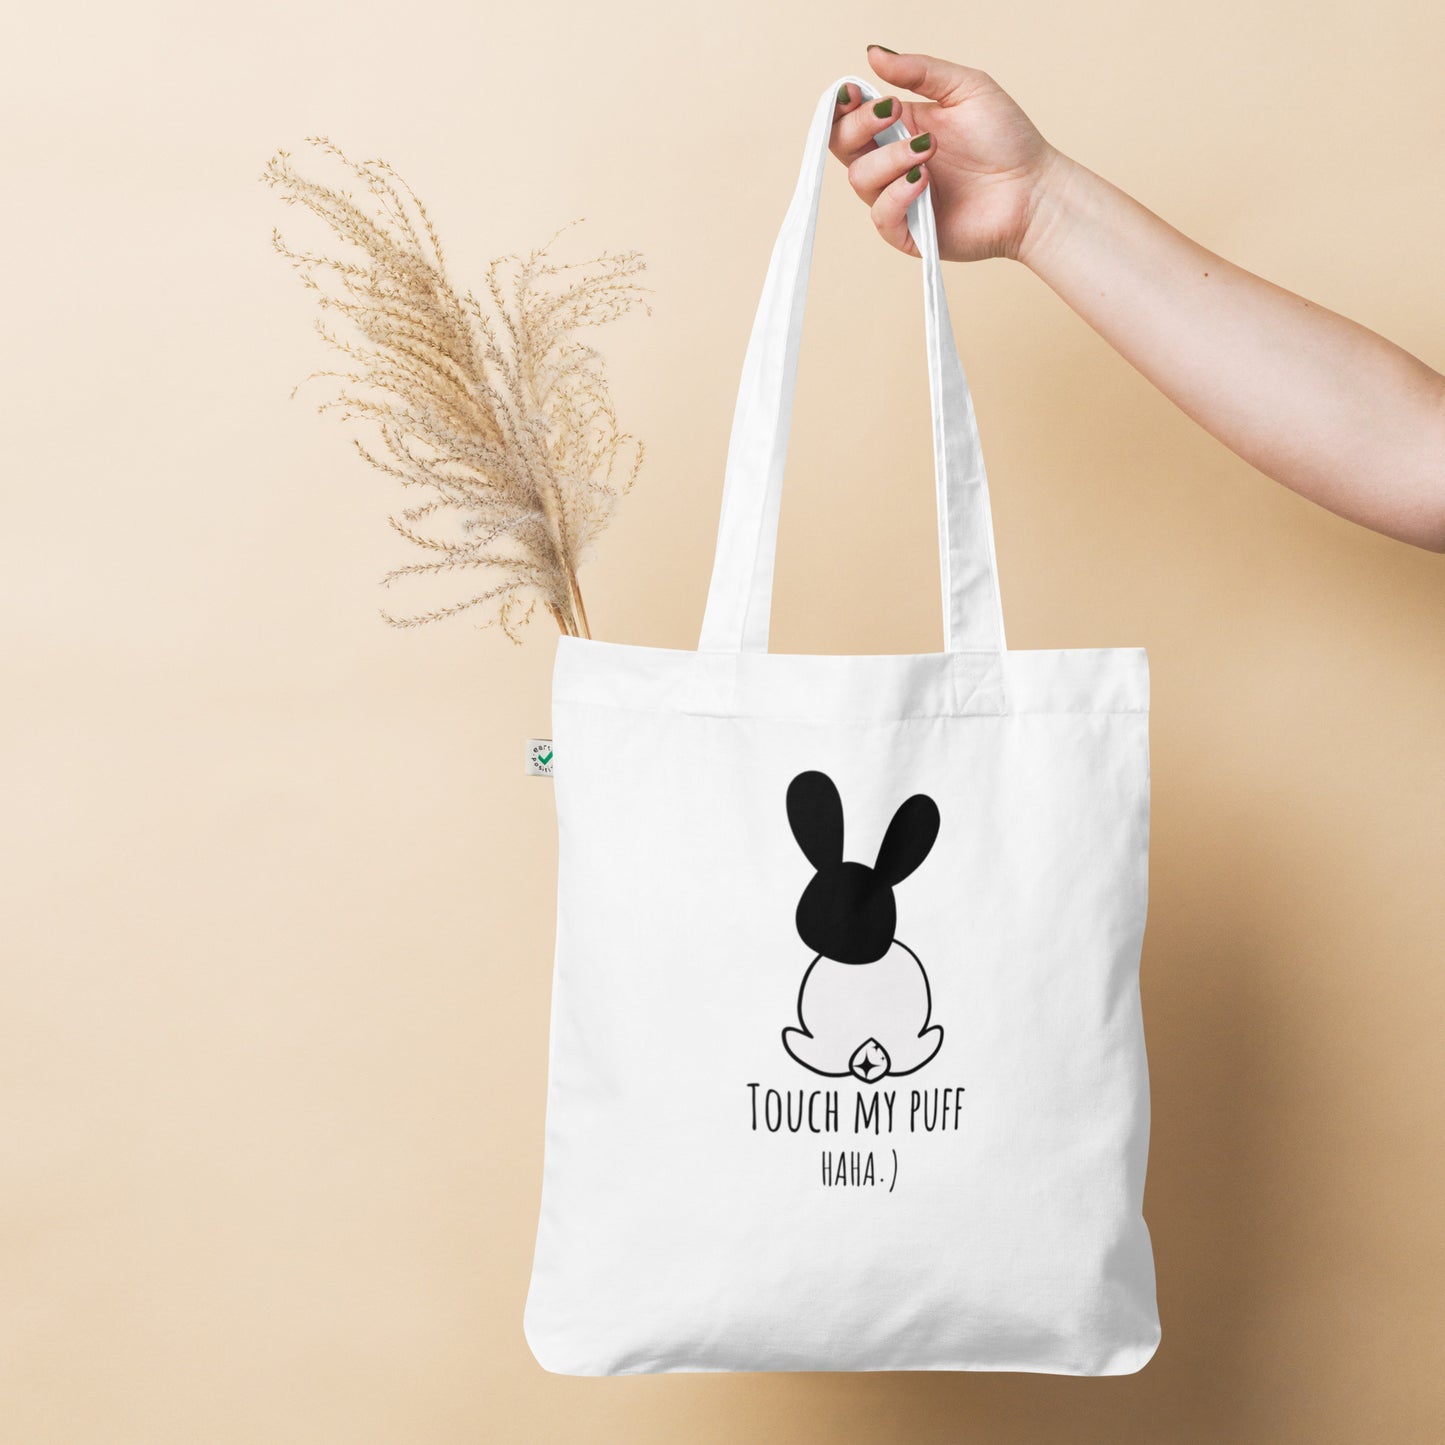 Touch My Puff Organic fashion tote bag